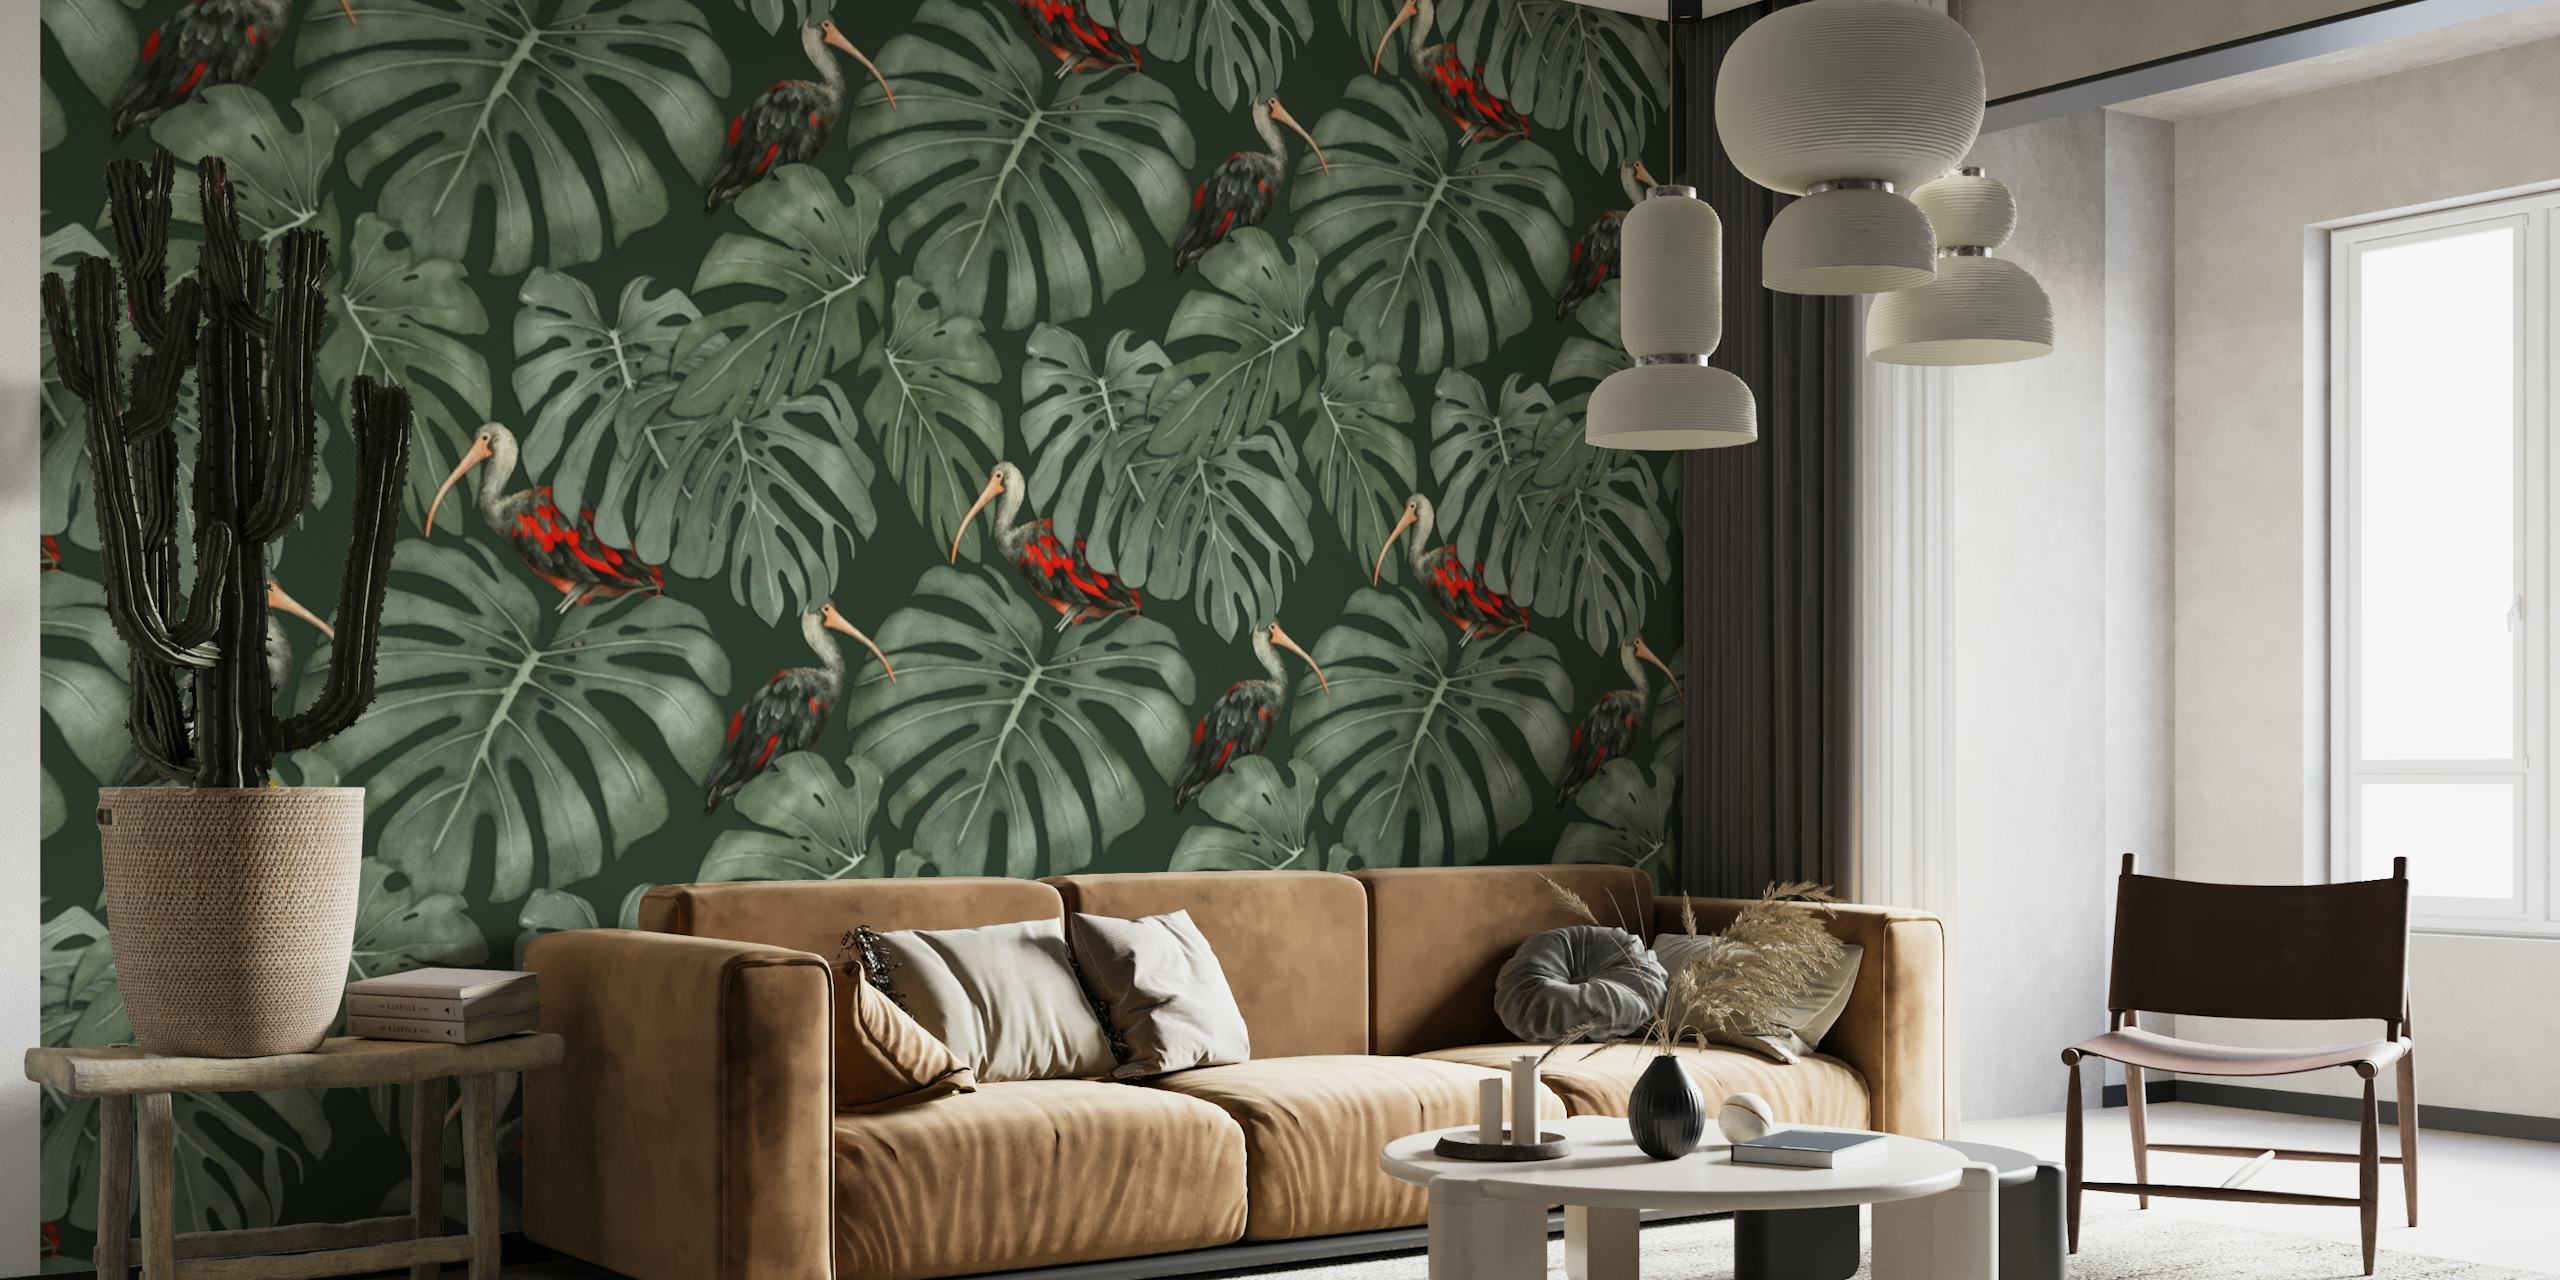 Scarlet ibis birds perched amongst lush green monstera leaves on a wall mural